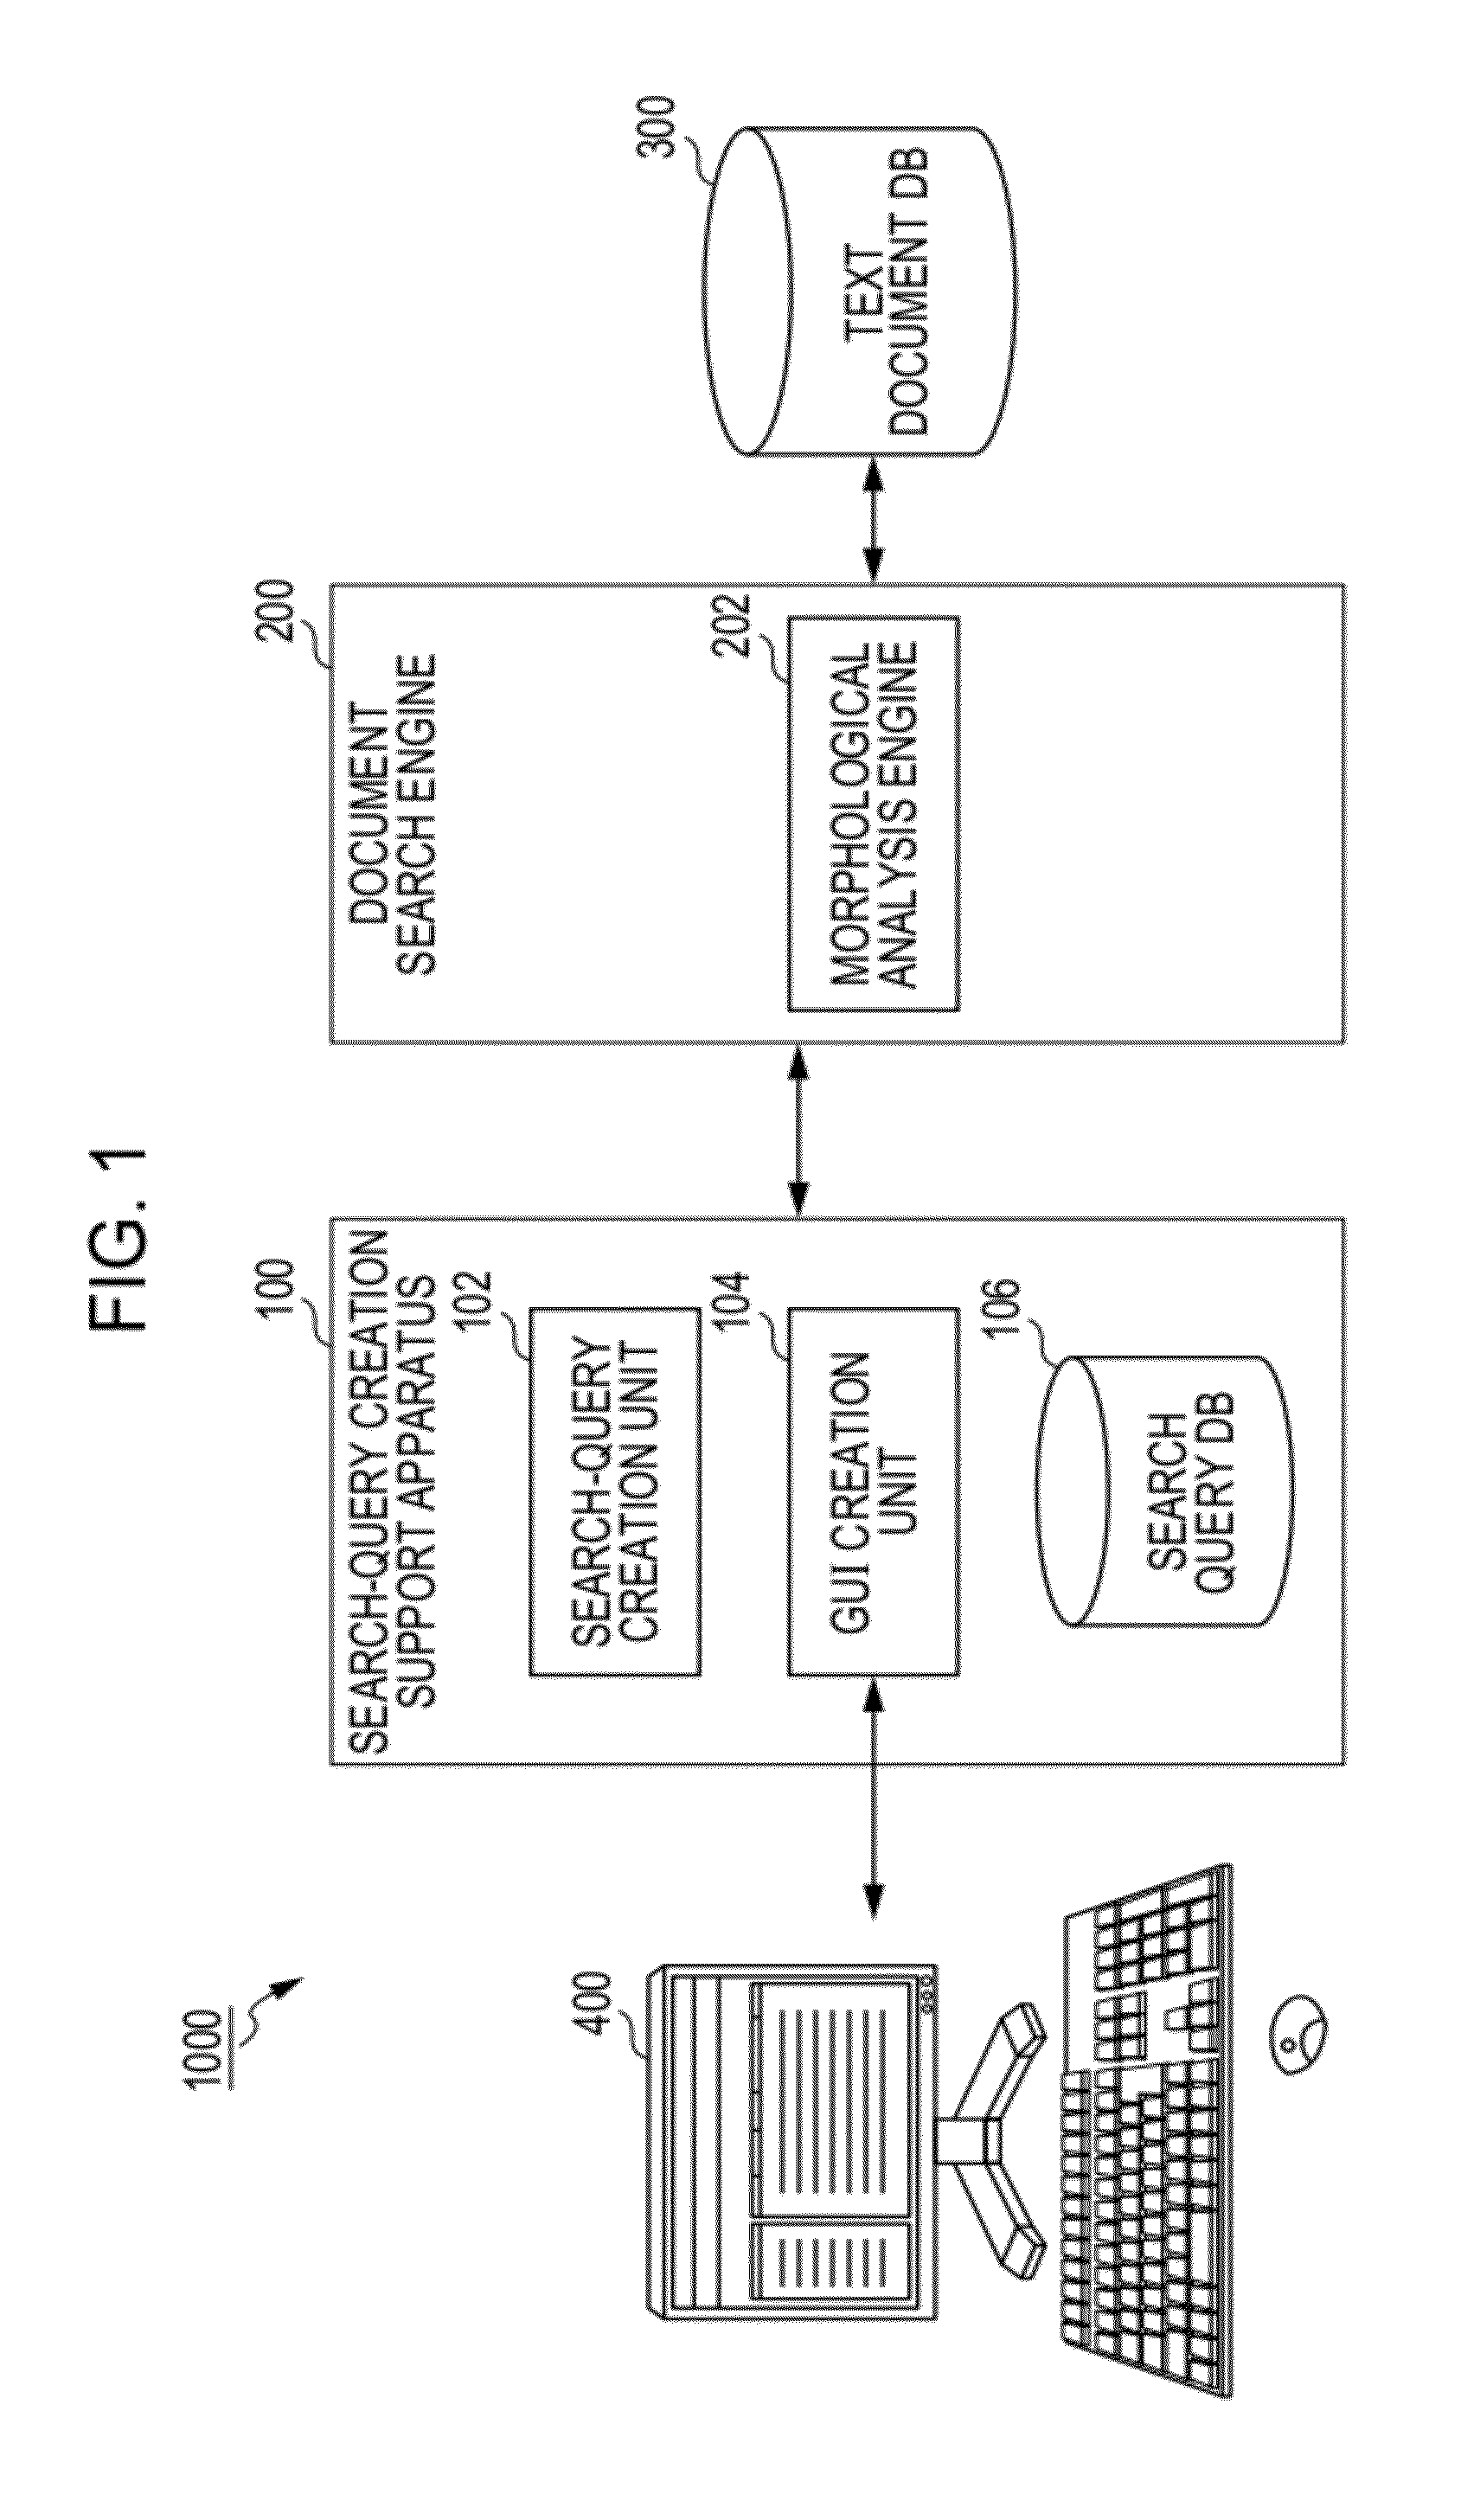 Graphical User Interface for a Search Query